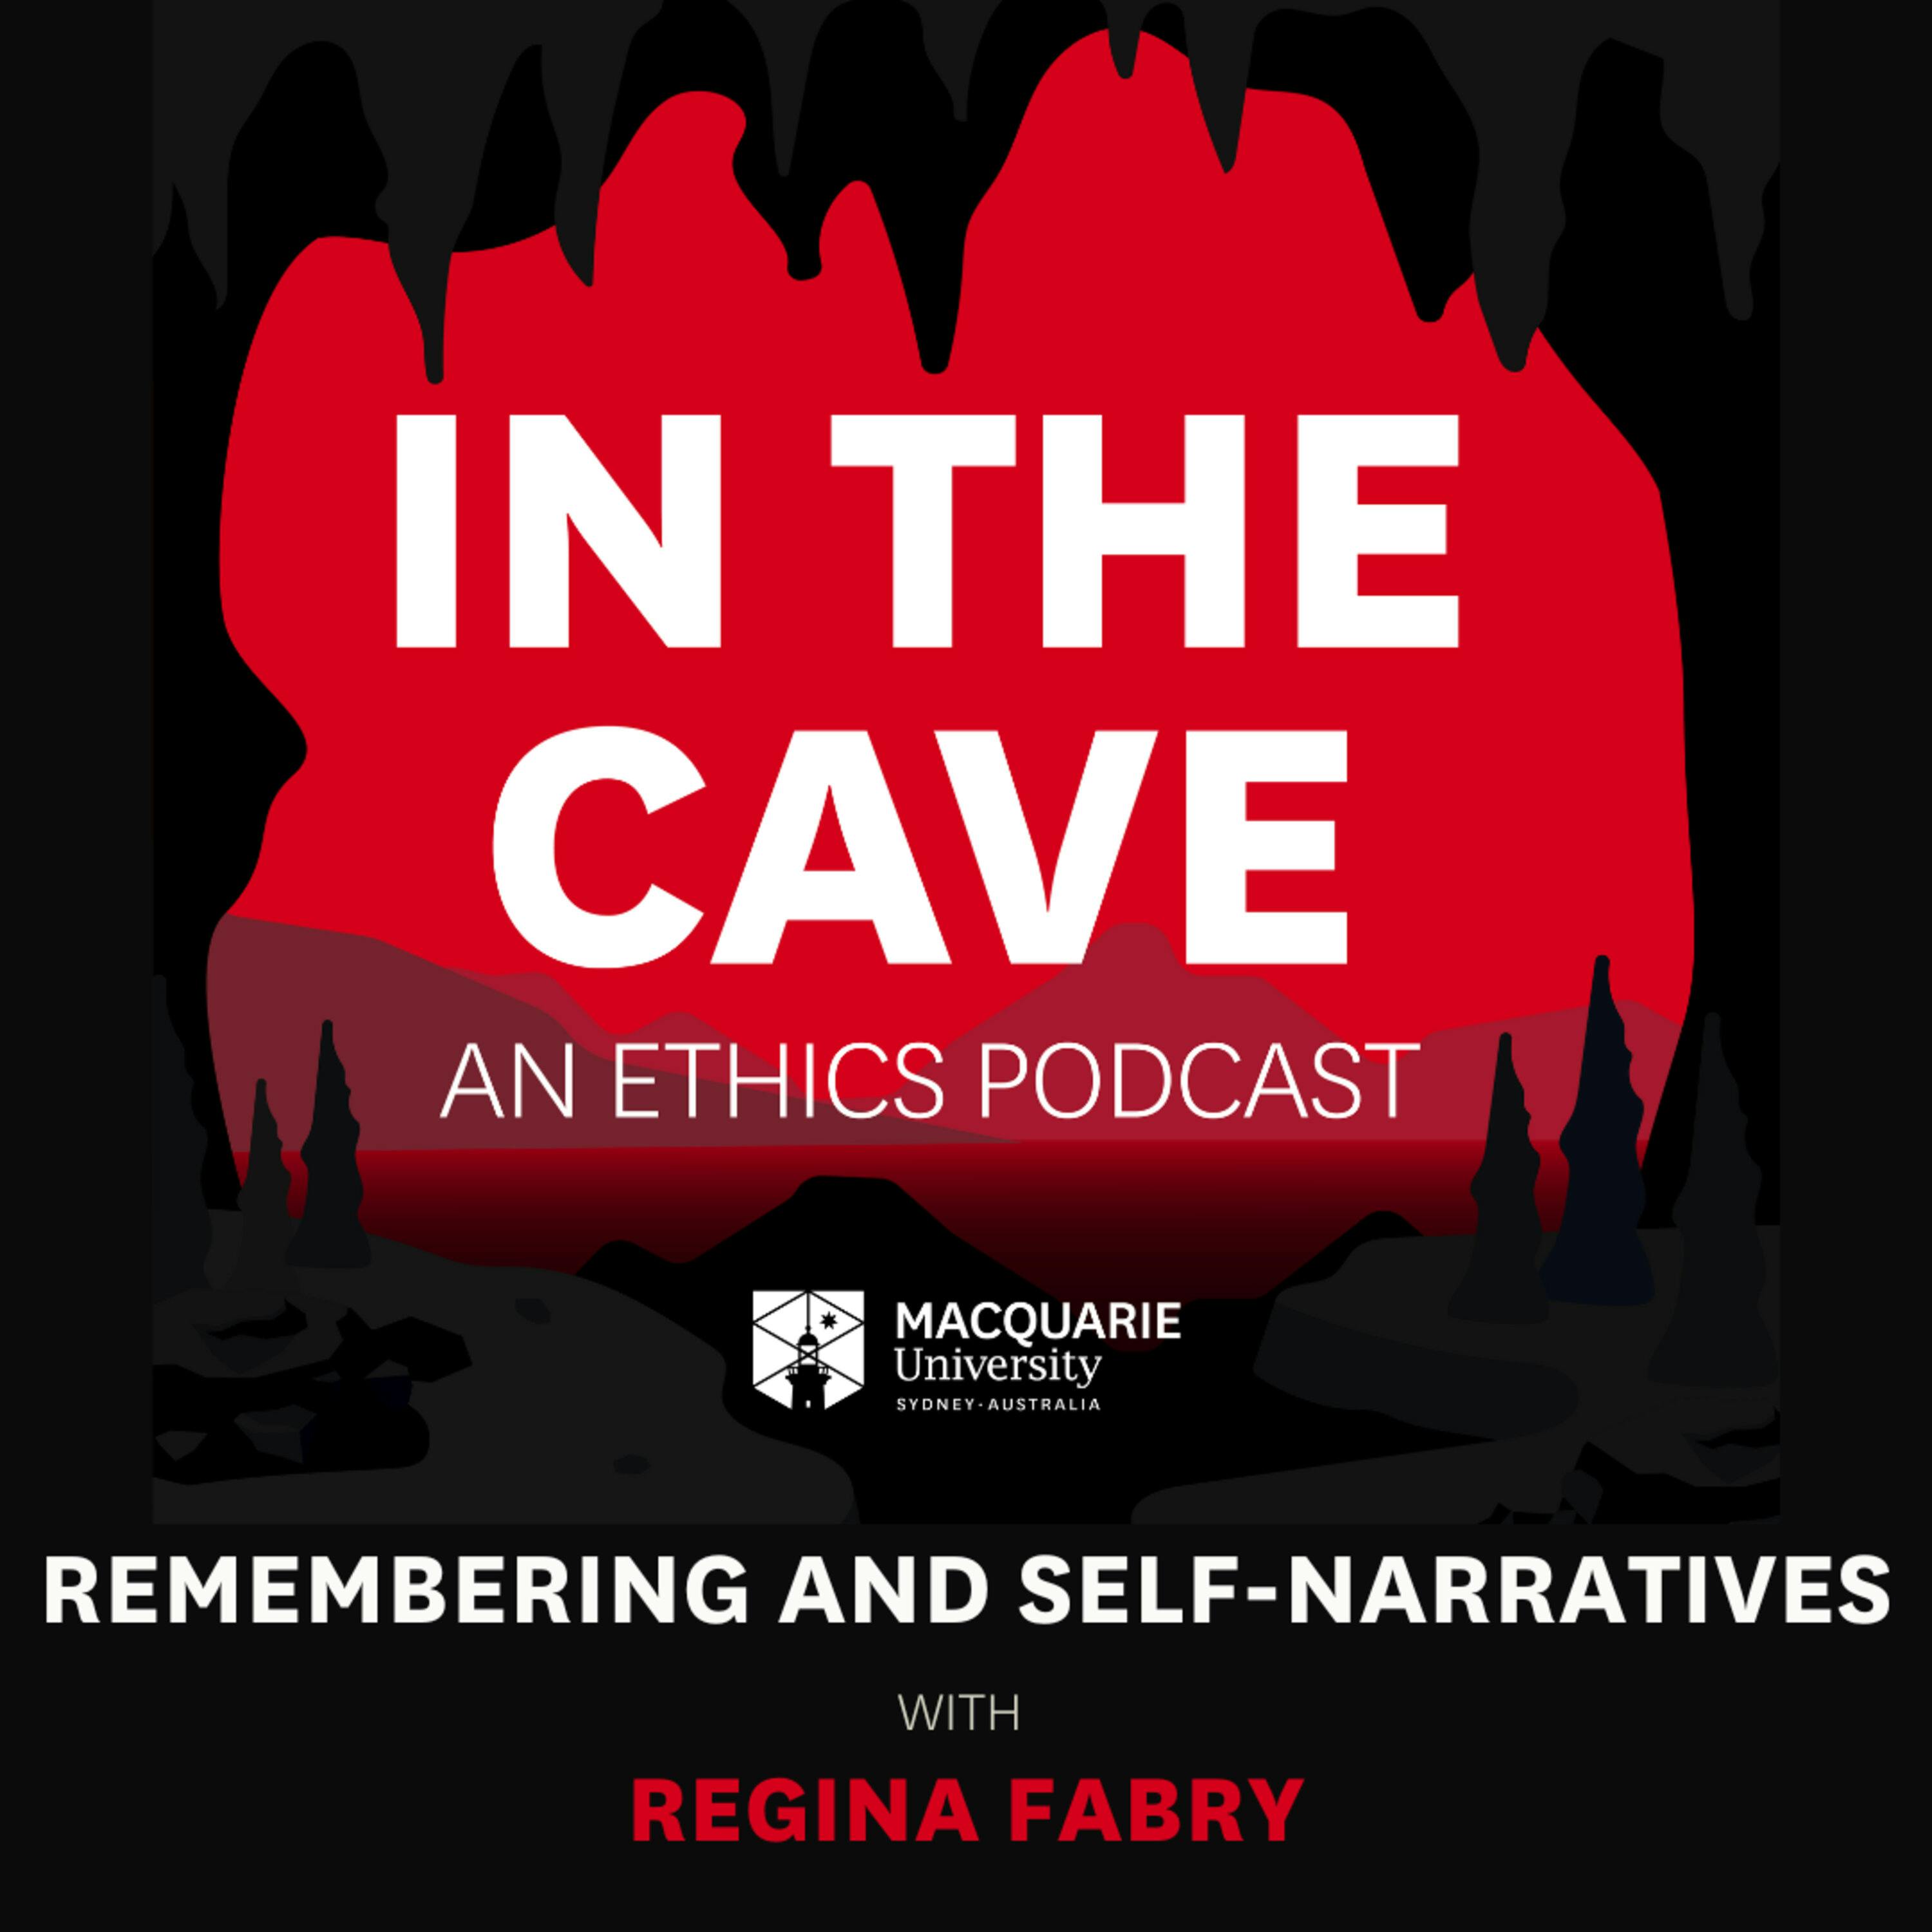 Remembering and self-narratives with Regina Fabry